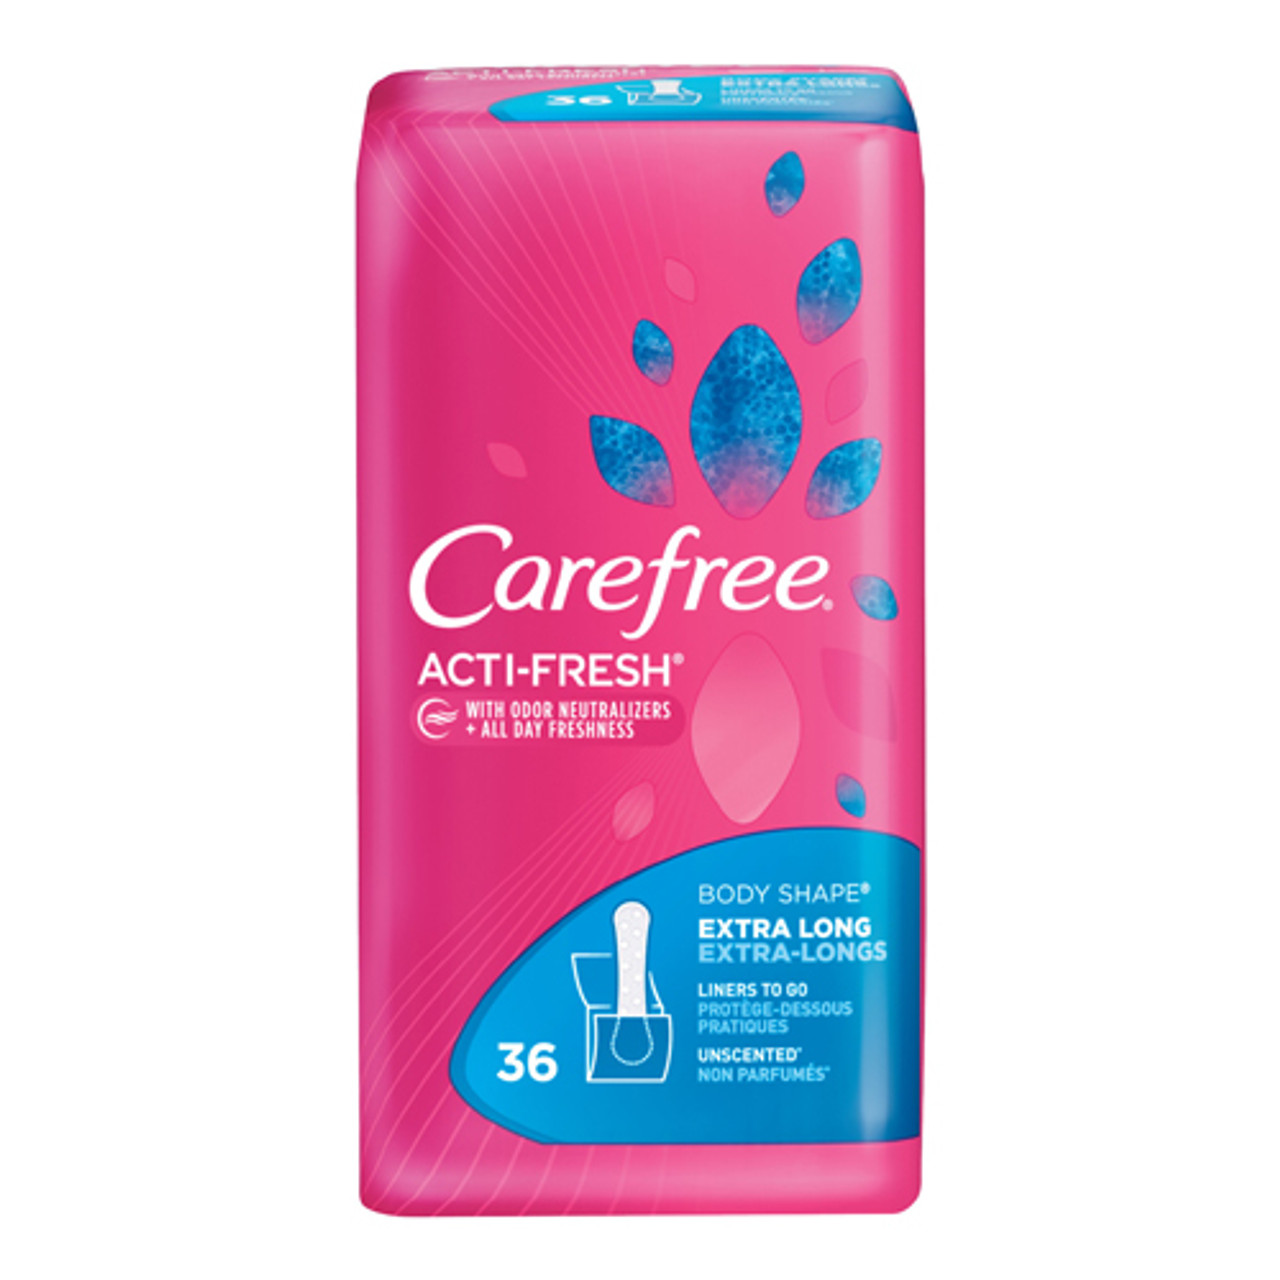 Carefree Acti-Fresh Body Shape Unscented Regular Liners, 20 Count